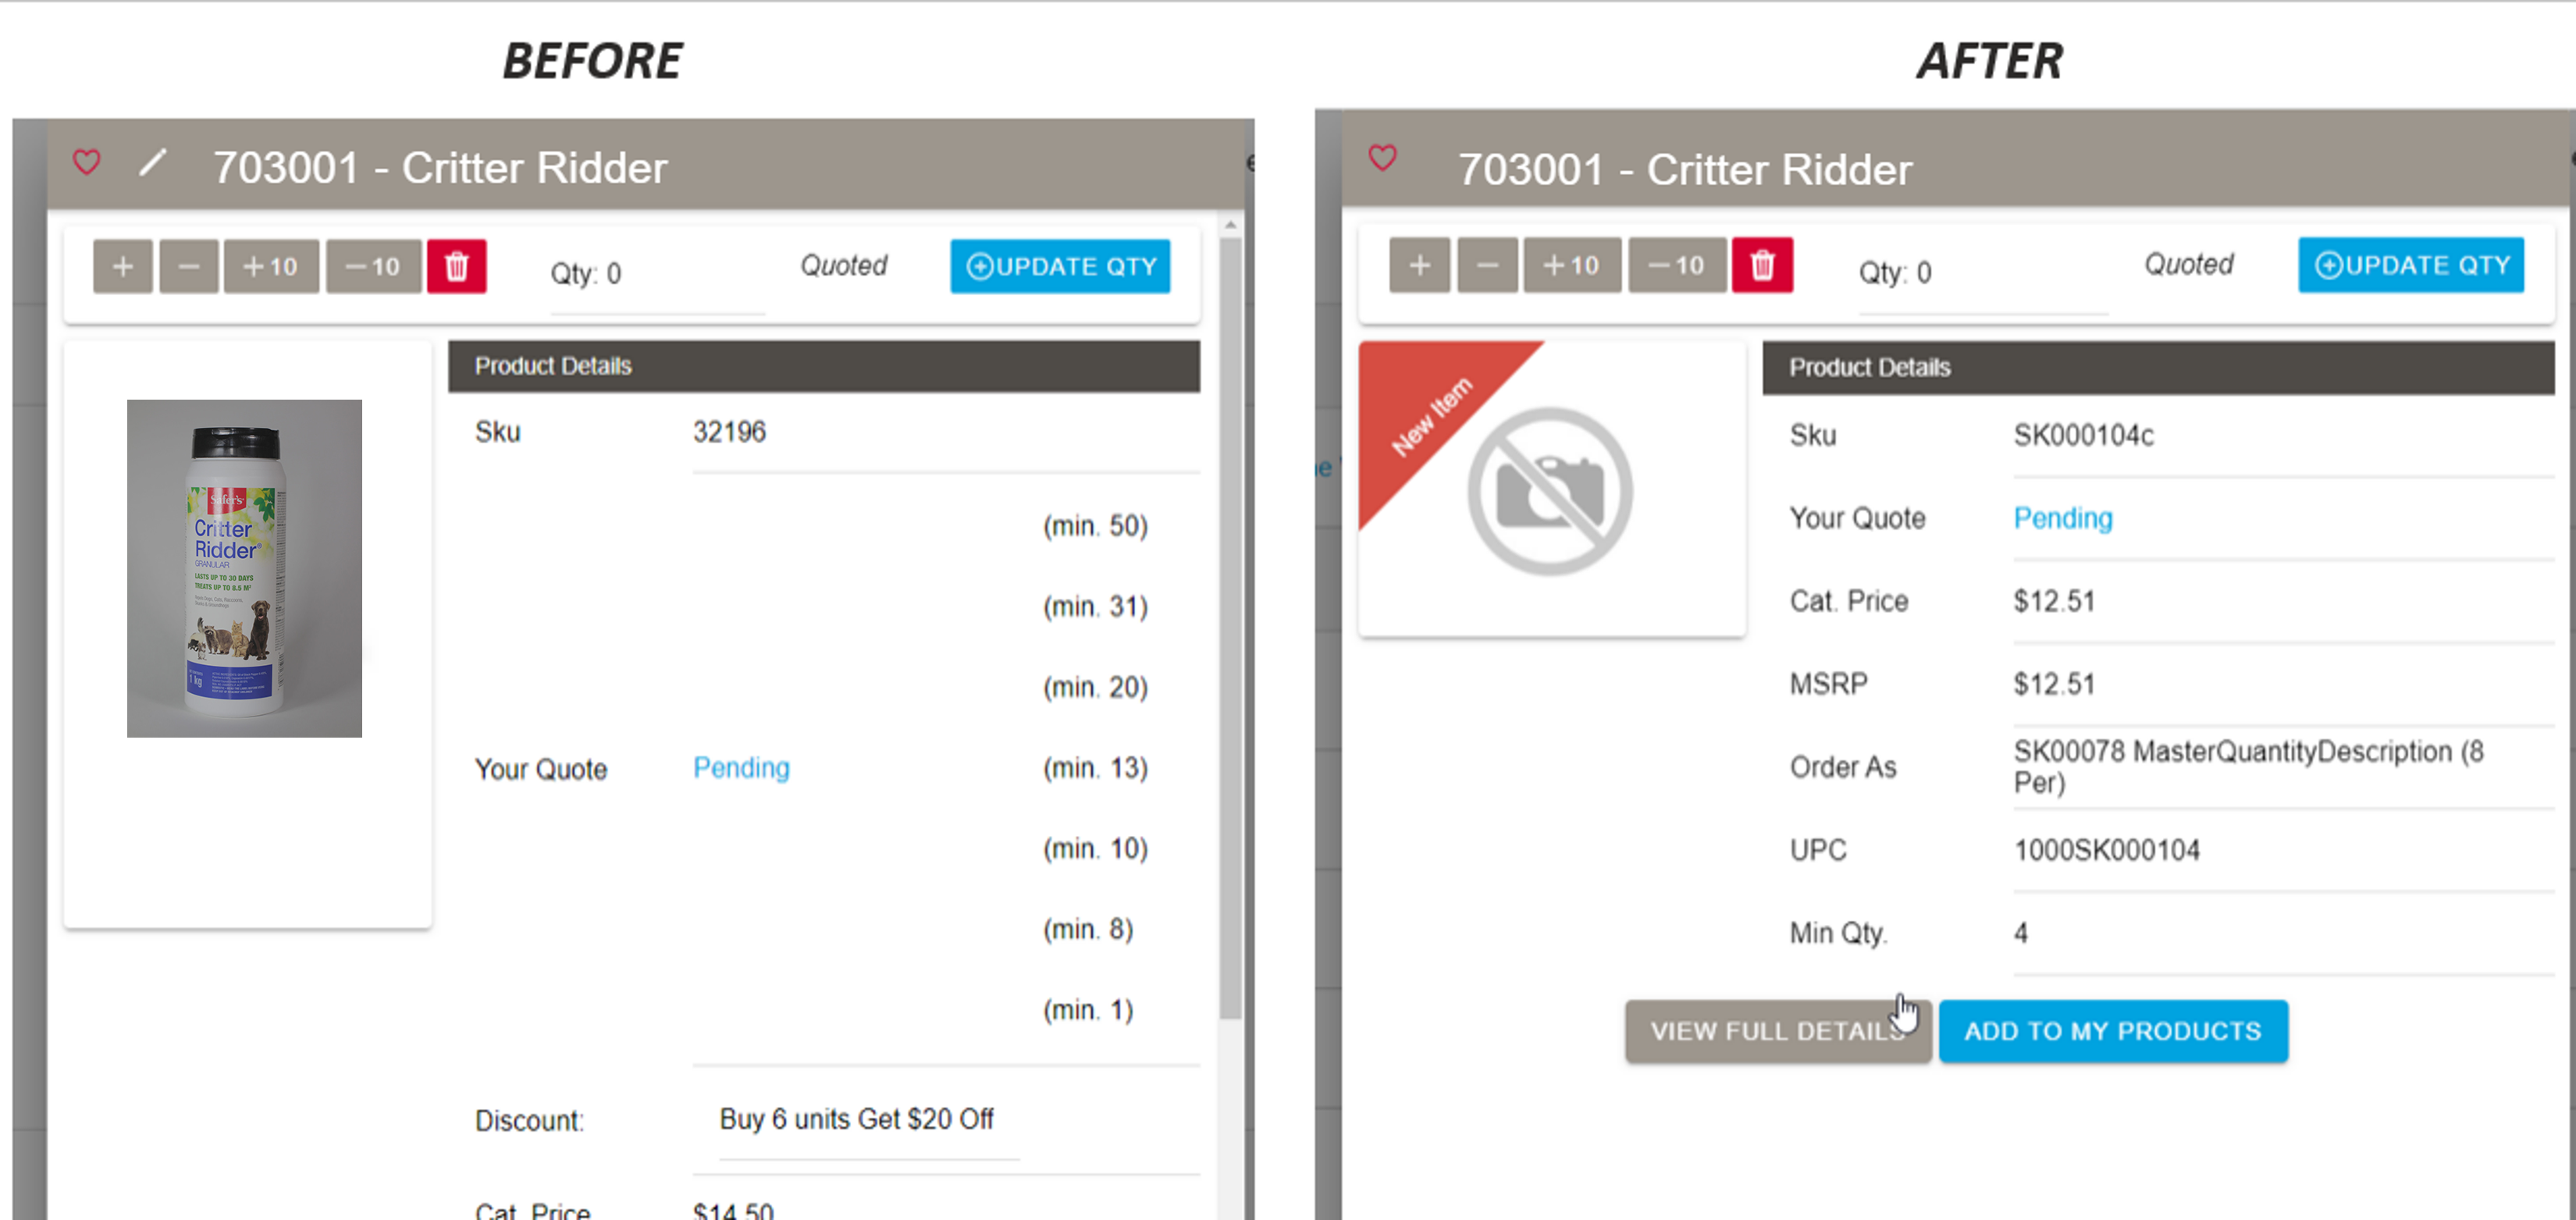 Pricing removed from product view when a user isn't logged in, shows price for the quoted item is Pending status